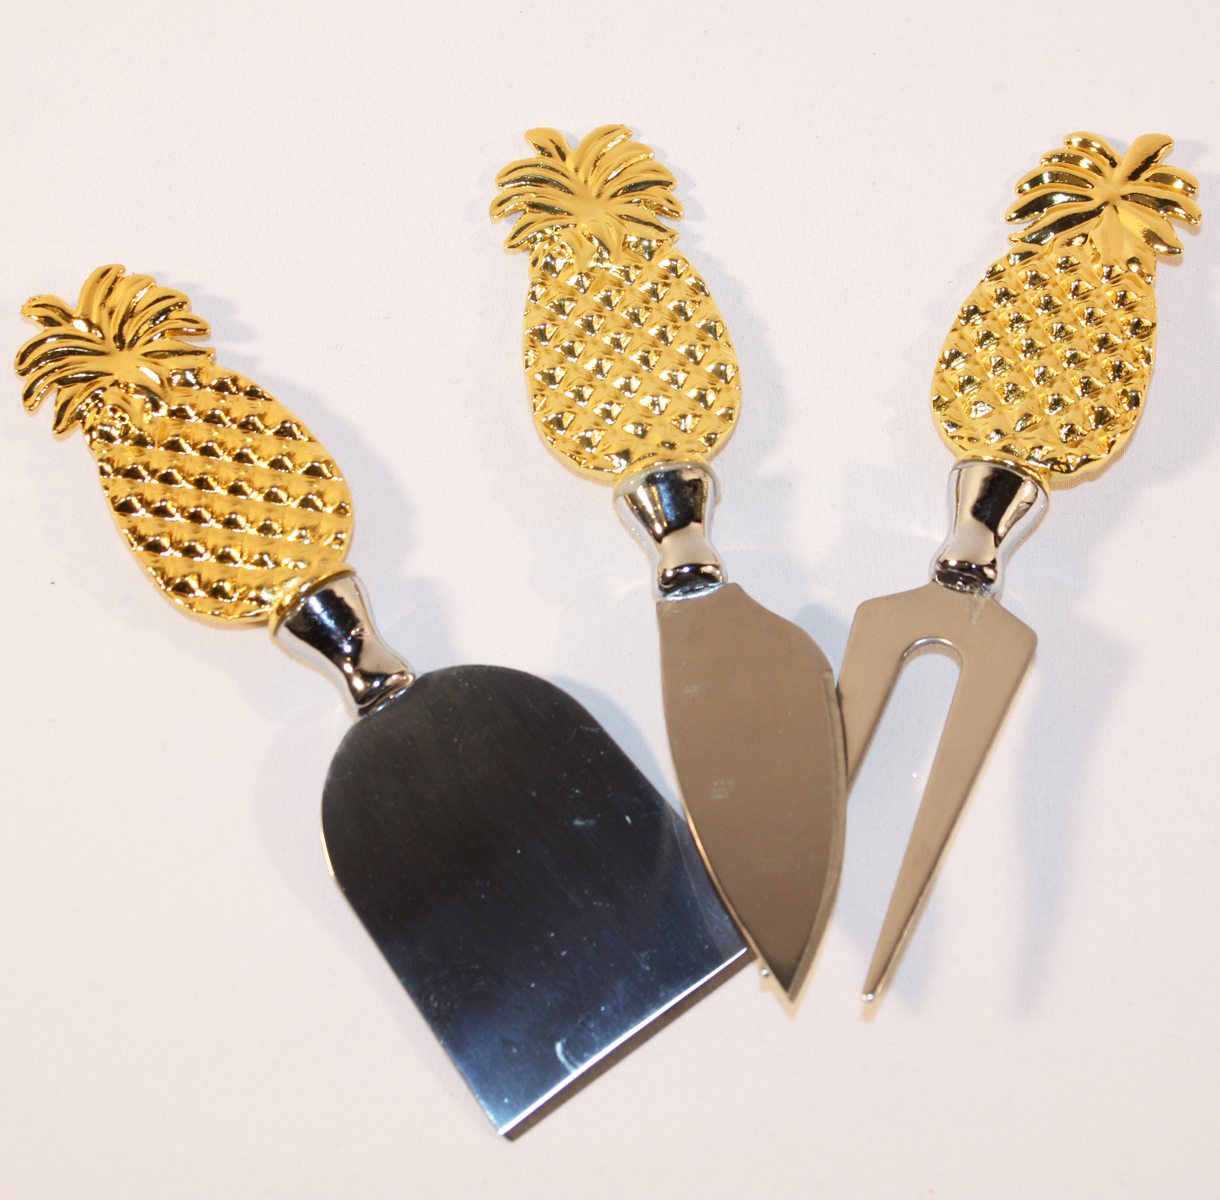 Golden Pineapple Set of 3 Cheese Knives